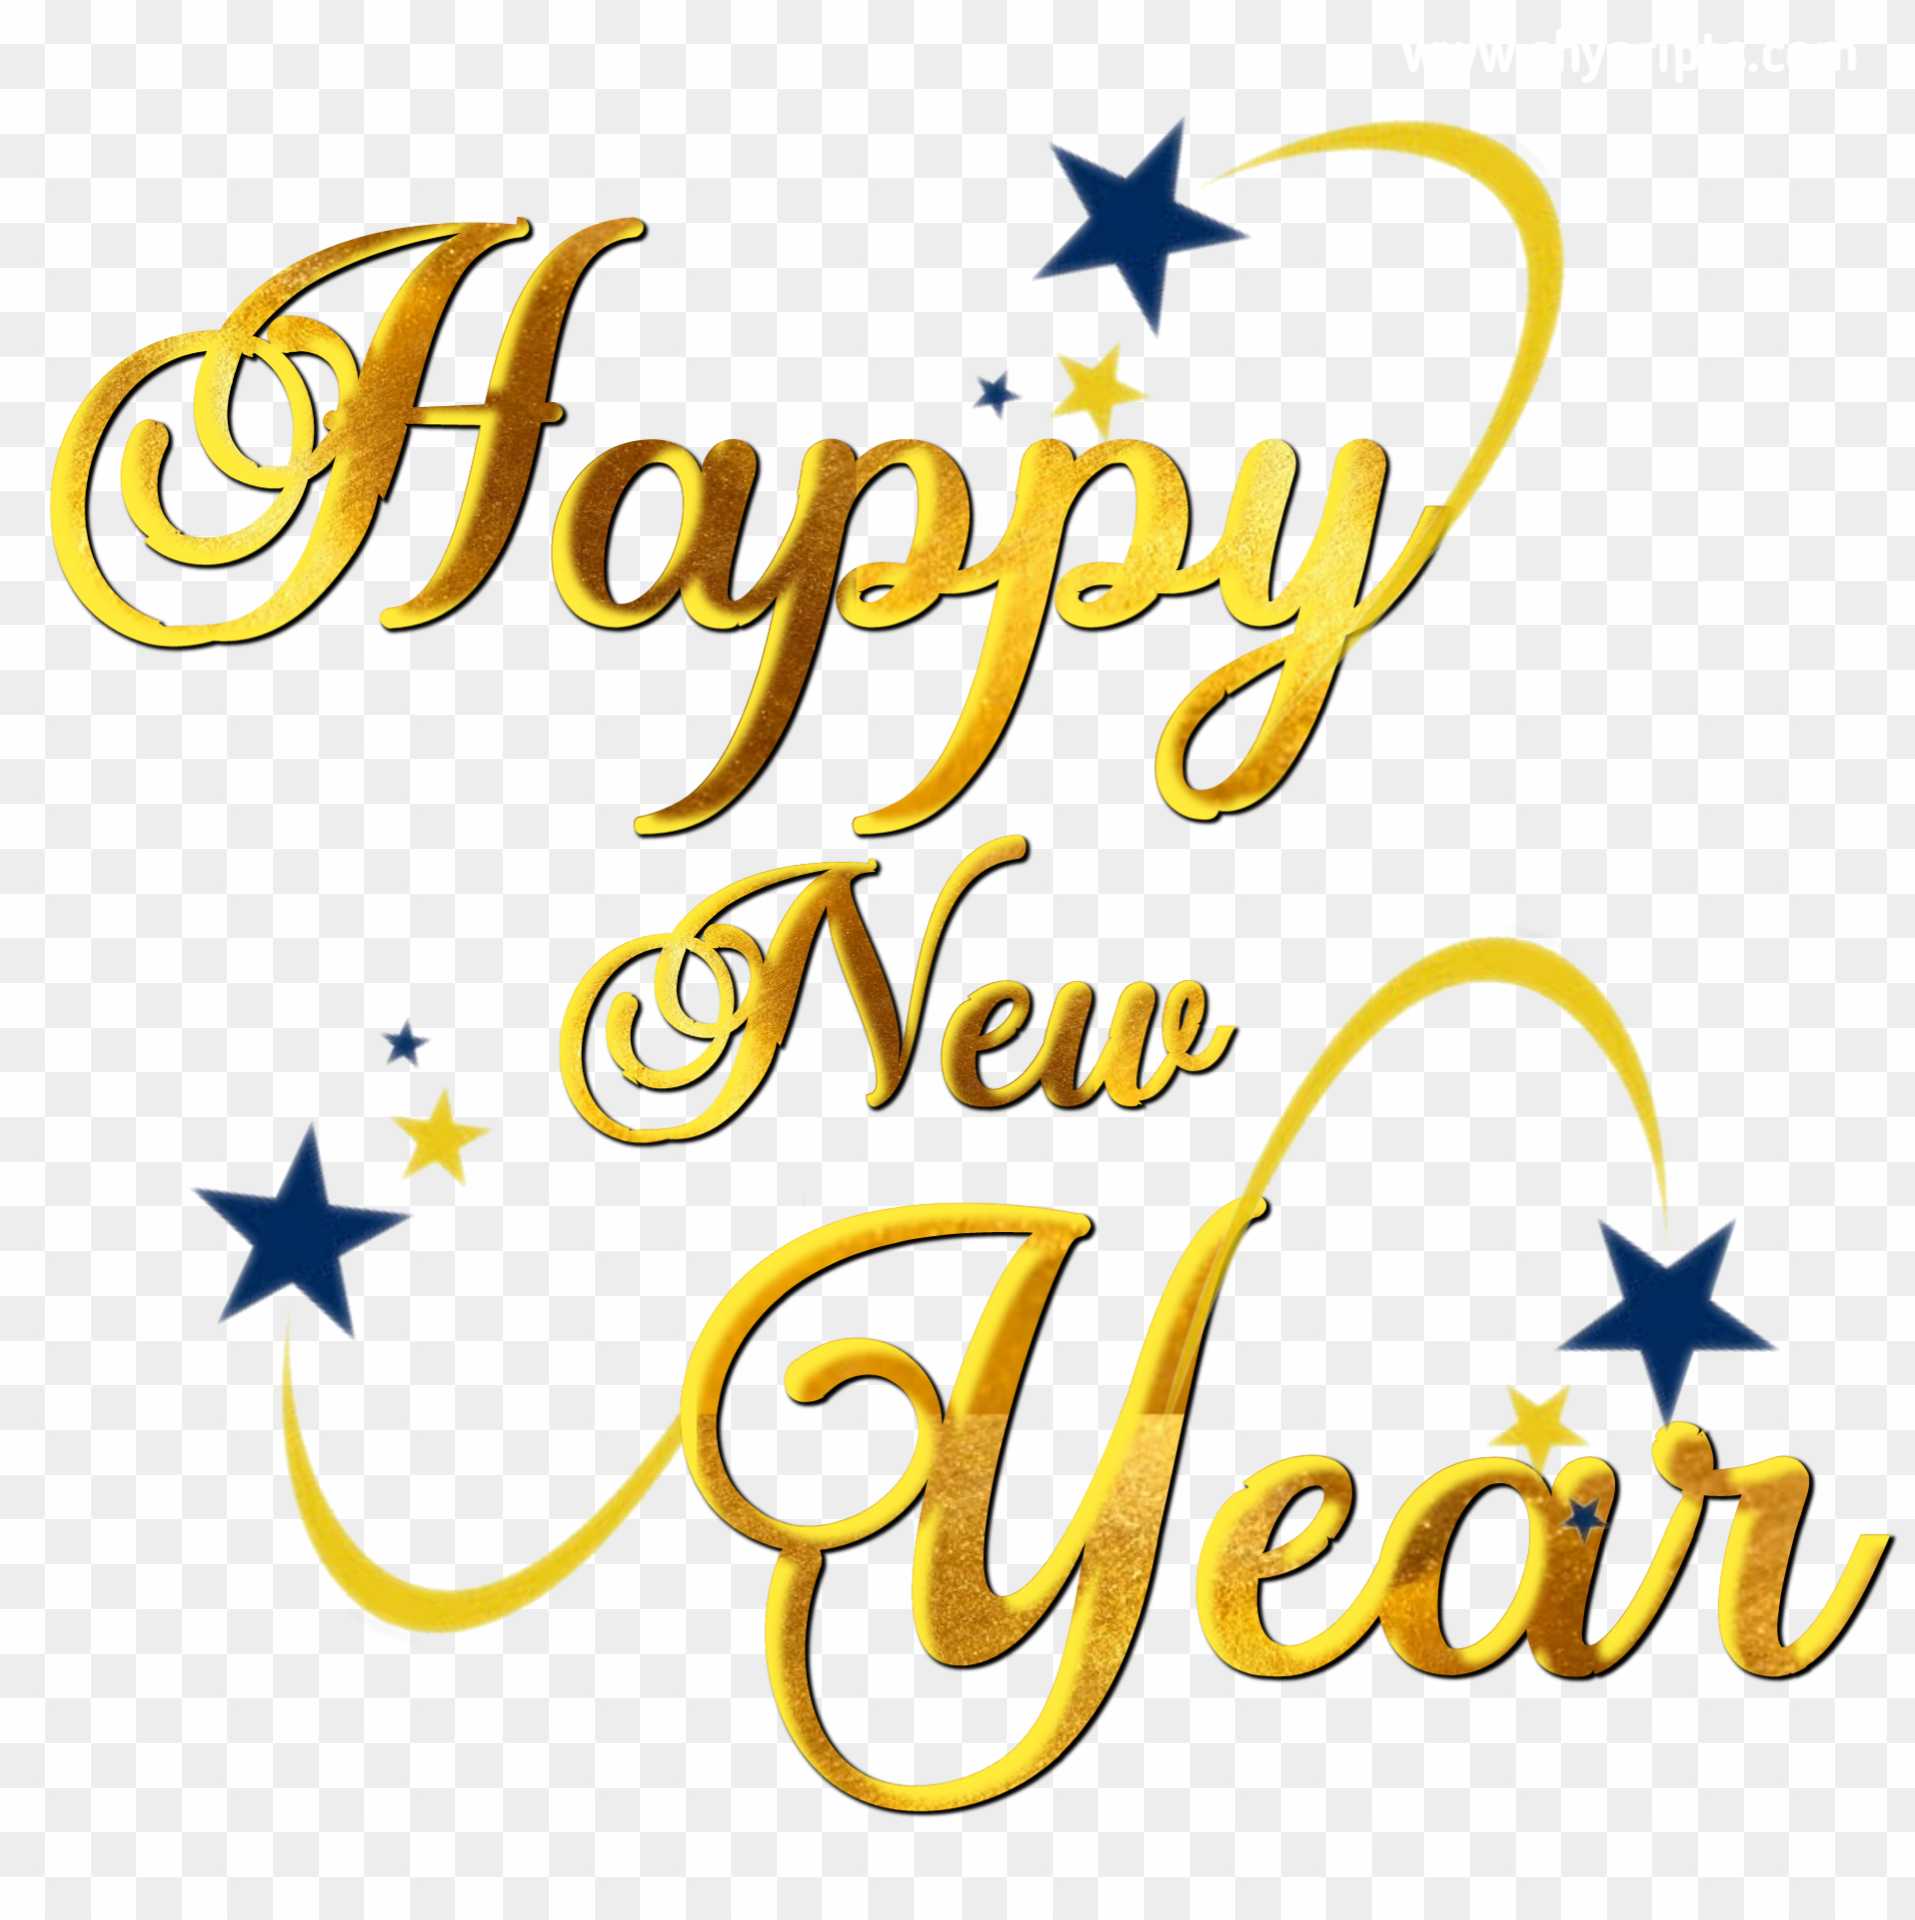 Happy New year PNG transparent images